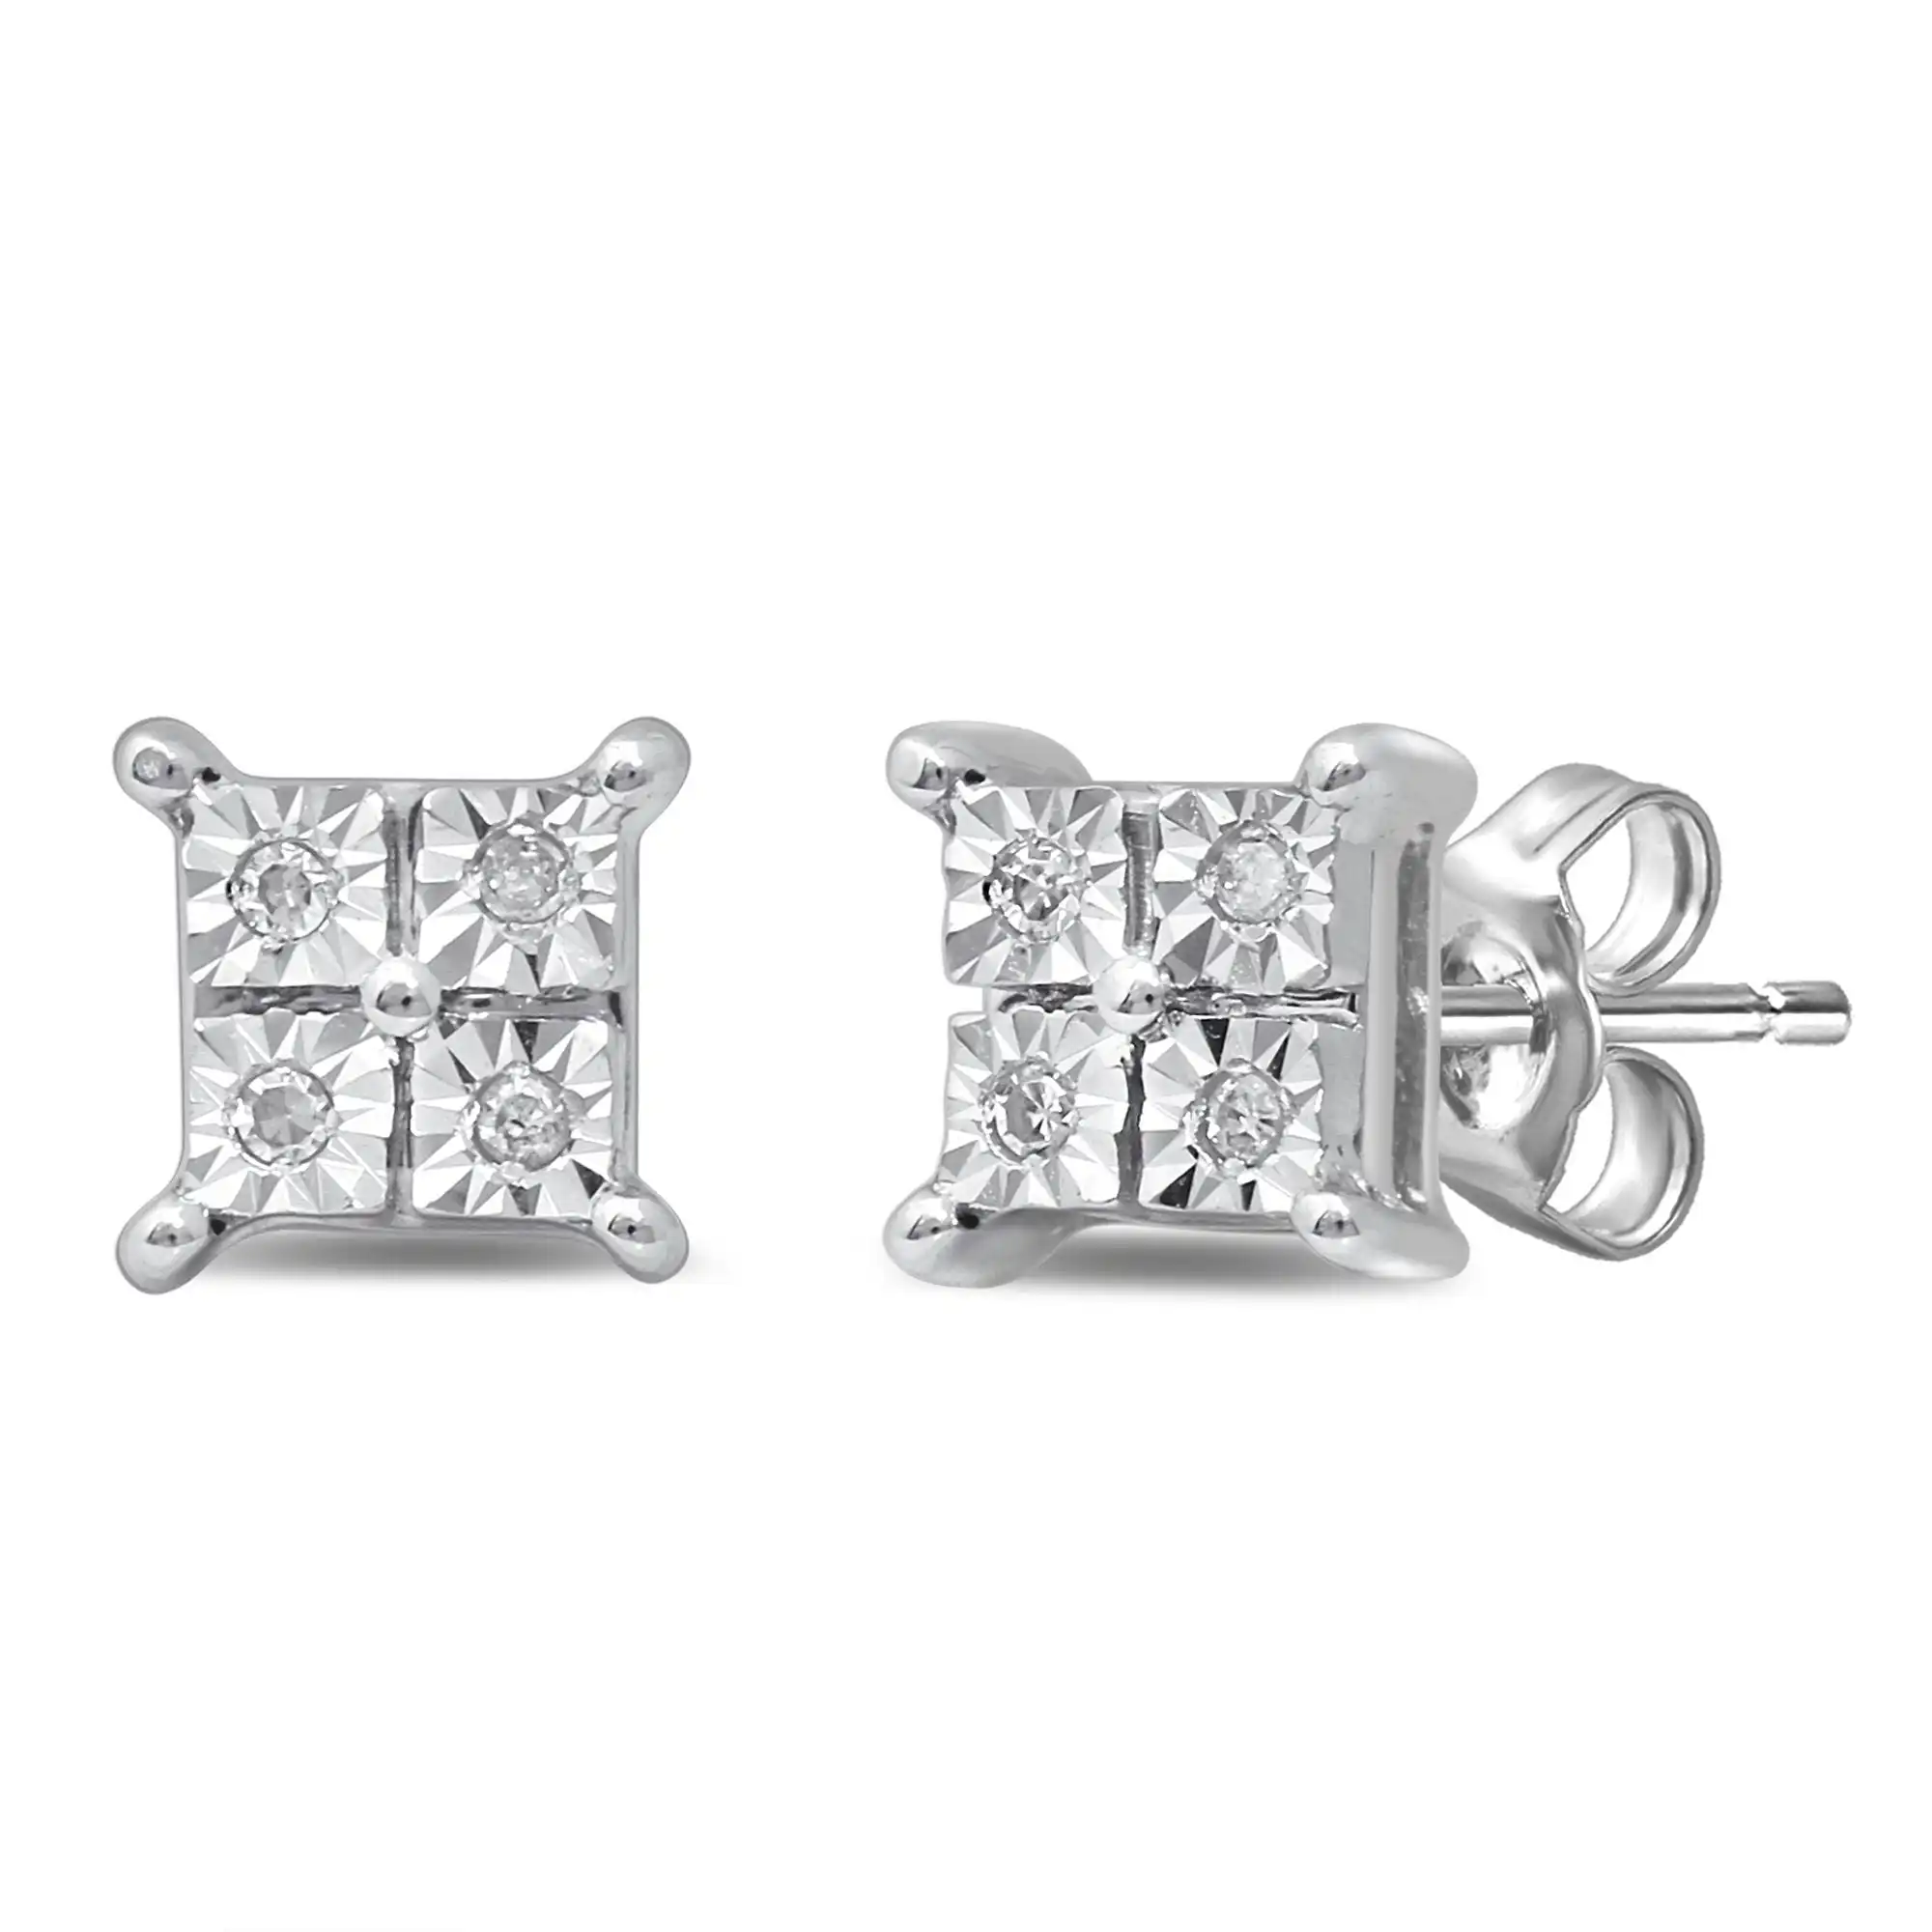 Diamond Illusion Square Look Earrings in 9ct White Gold